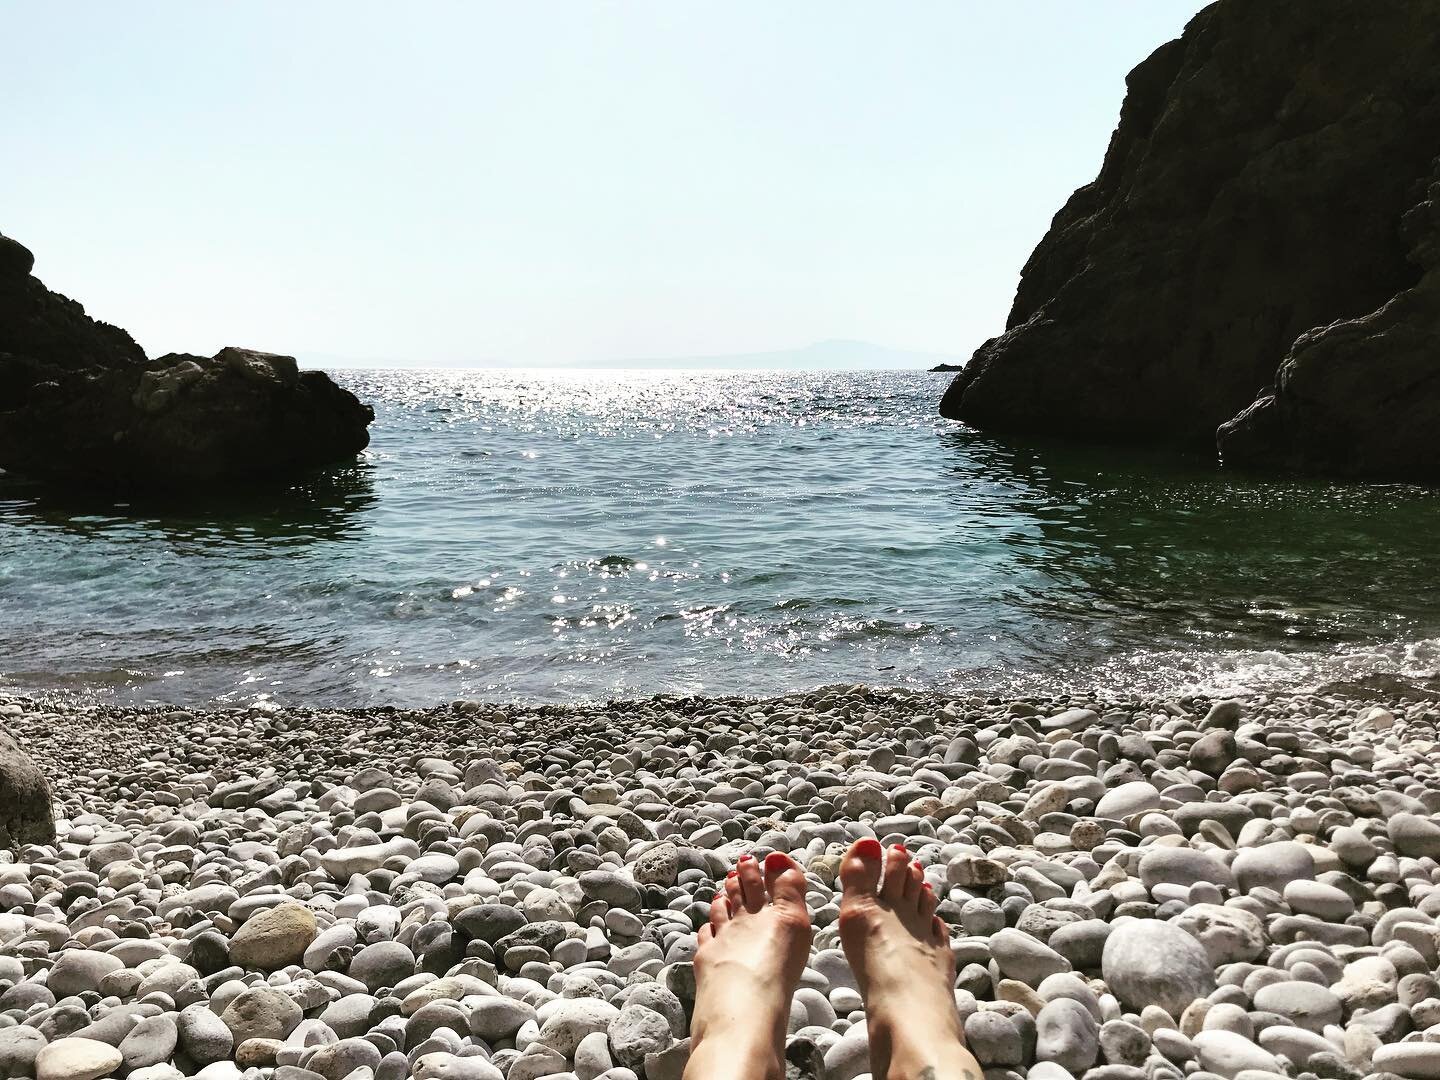 My soul home ☀️

As you can see me and my feet are unfolding into sunnier pastures. After 4 years of not being here, I&rsquo;m back on the Peloponnese in Greece, truly a soul home for me. I&rsquo;ve been coming here since I was 16 and knew then that 